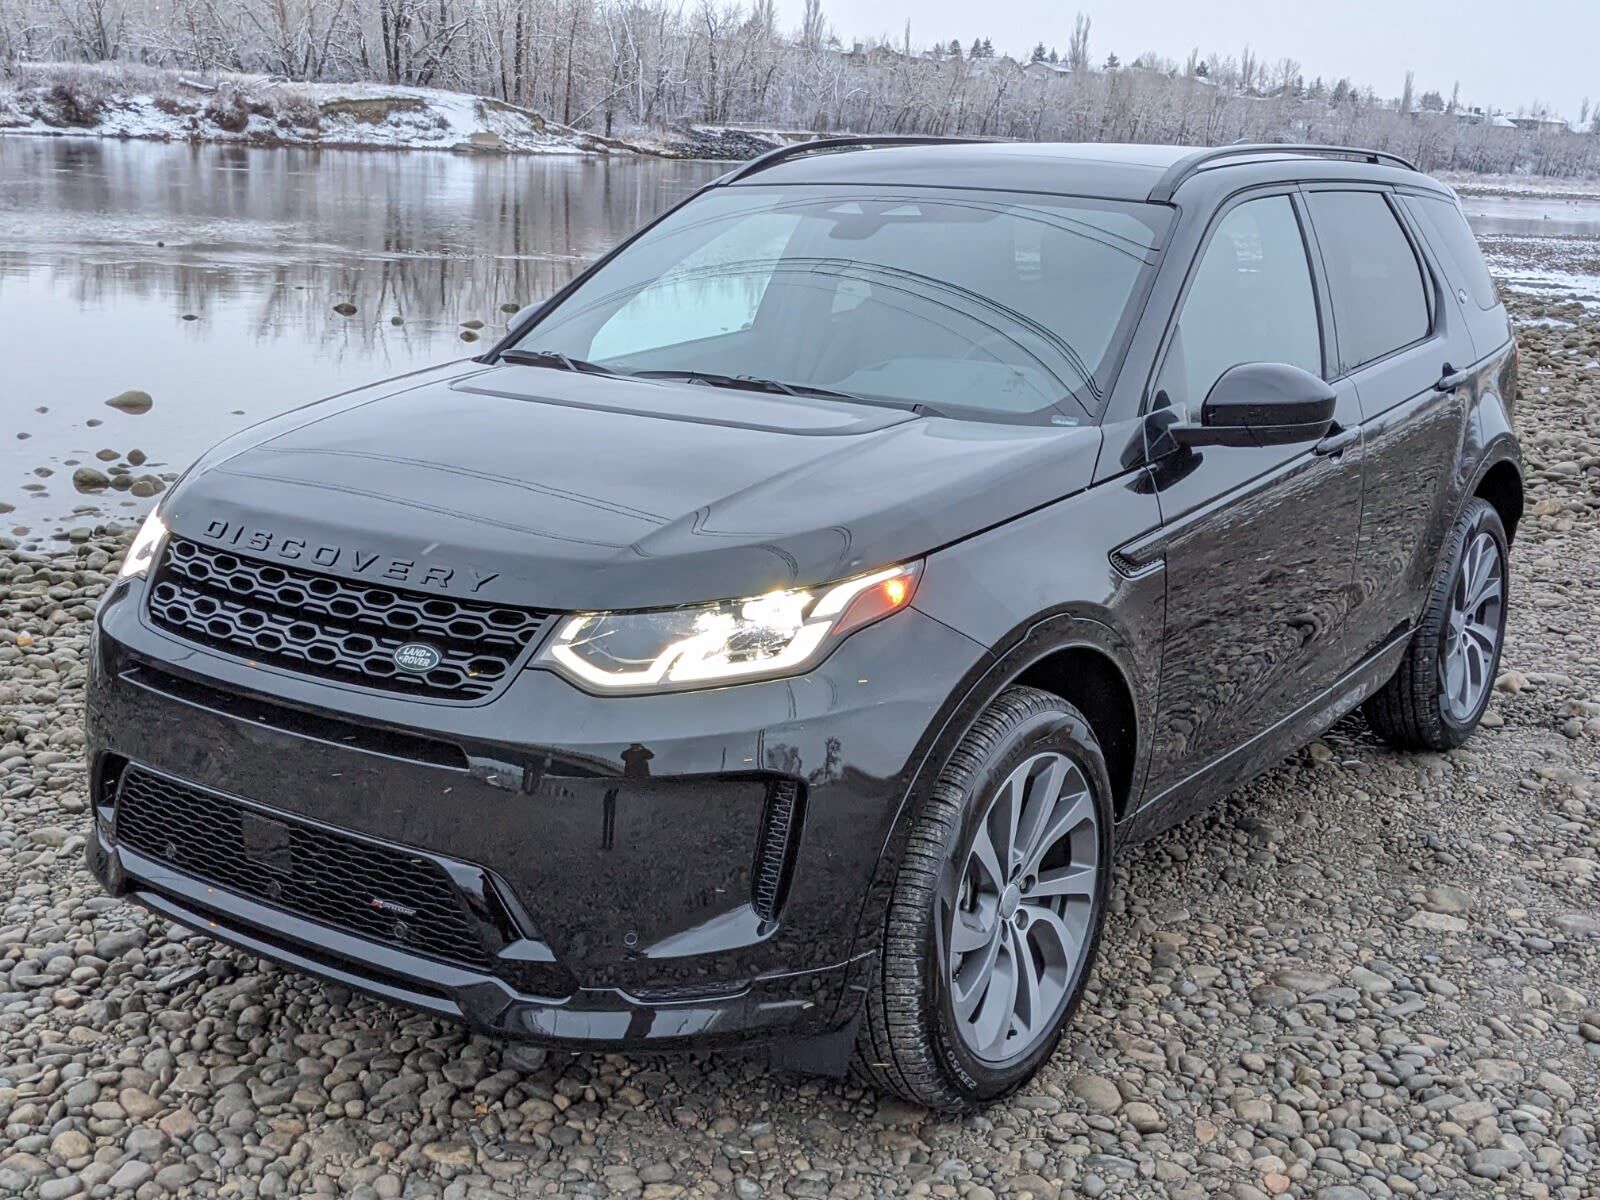 2023 Land Rover Discovery Sport $7,176 IN SAVINGS!! SE R-DYNAMIC MODEL!